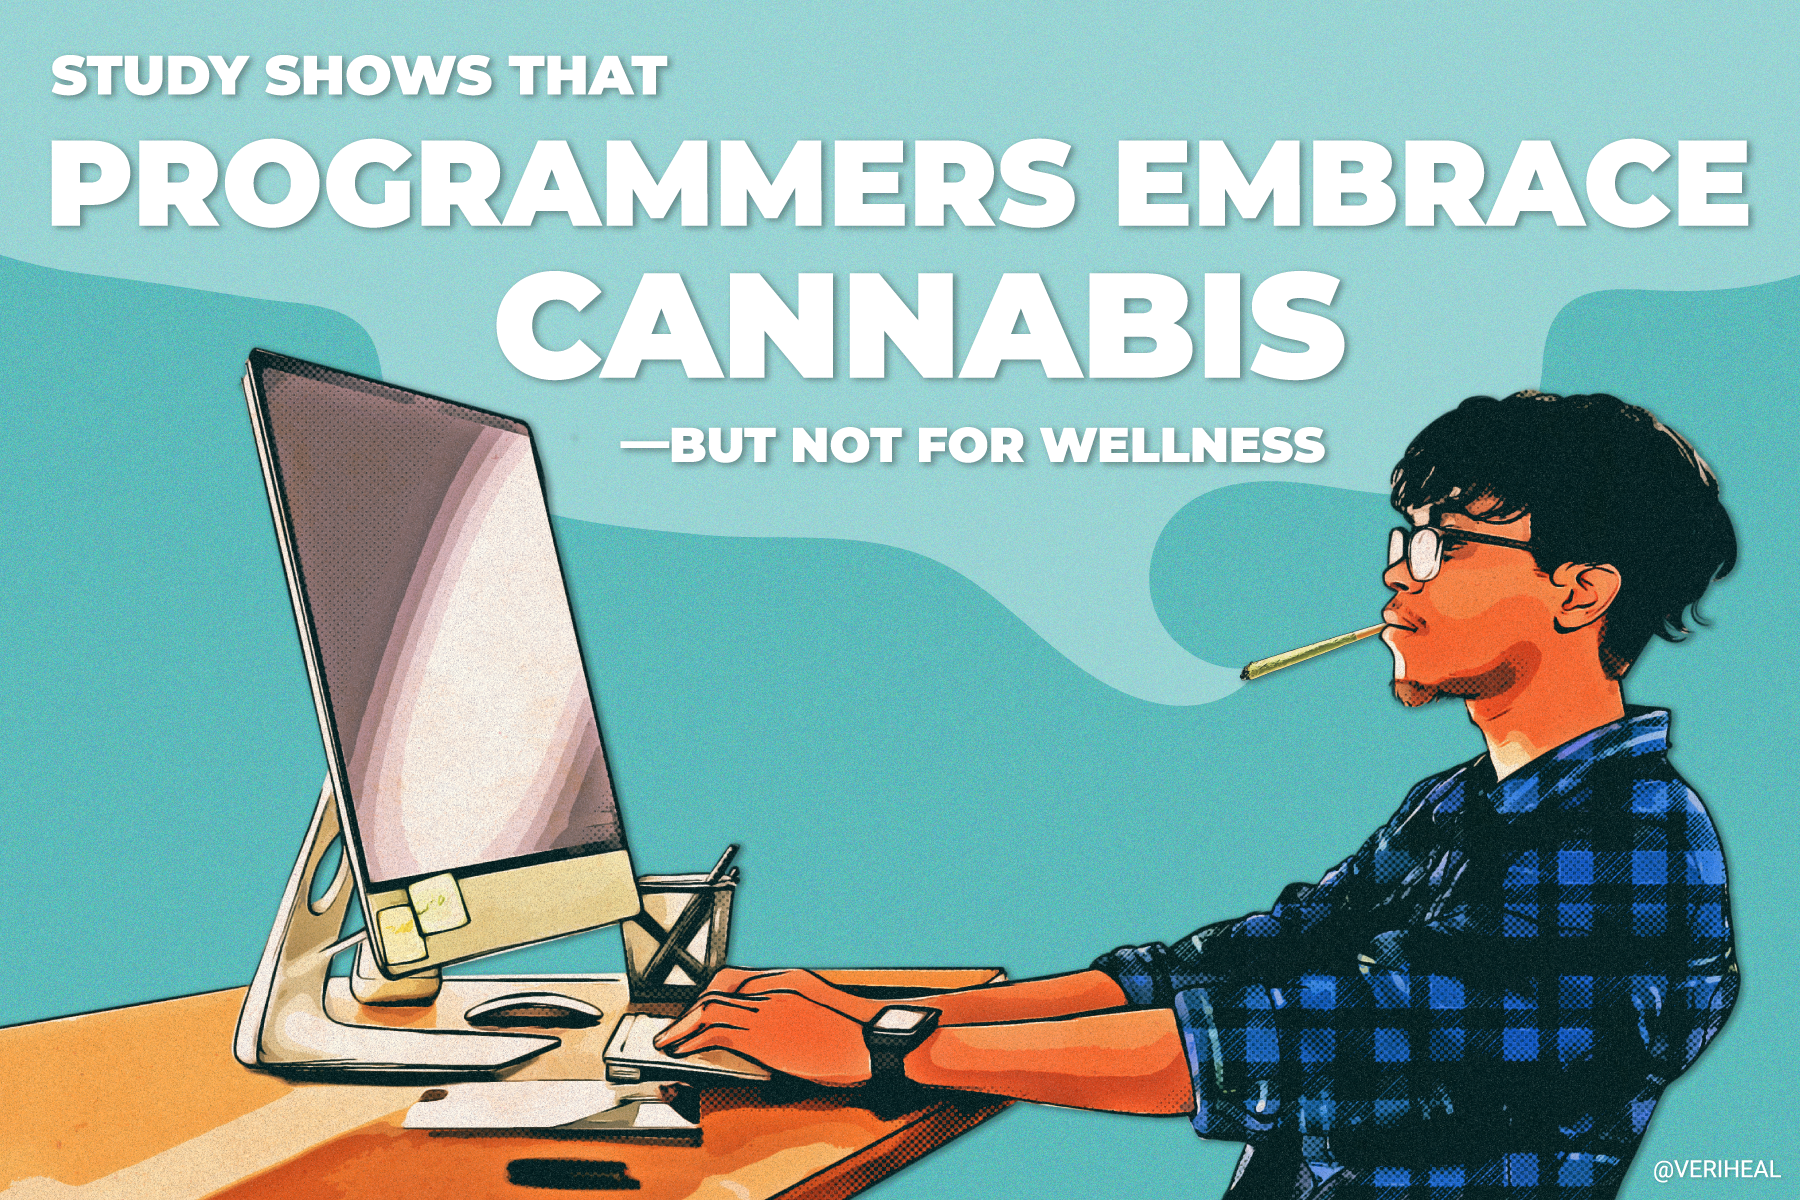 Study Shows That Programmers Embrace Cannabis—But Not for Wellness